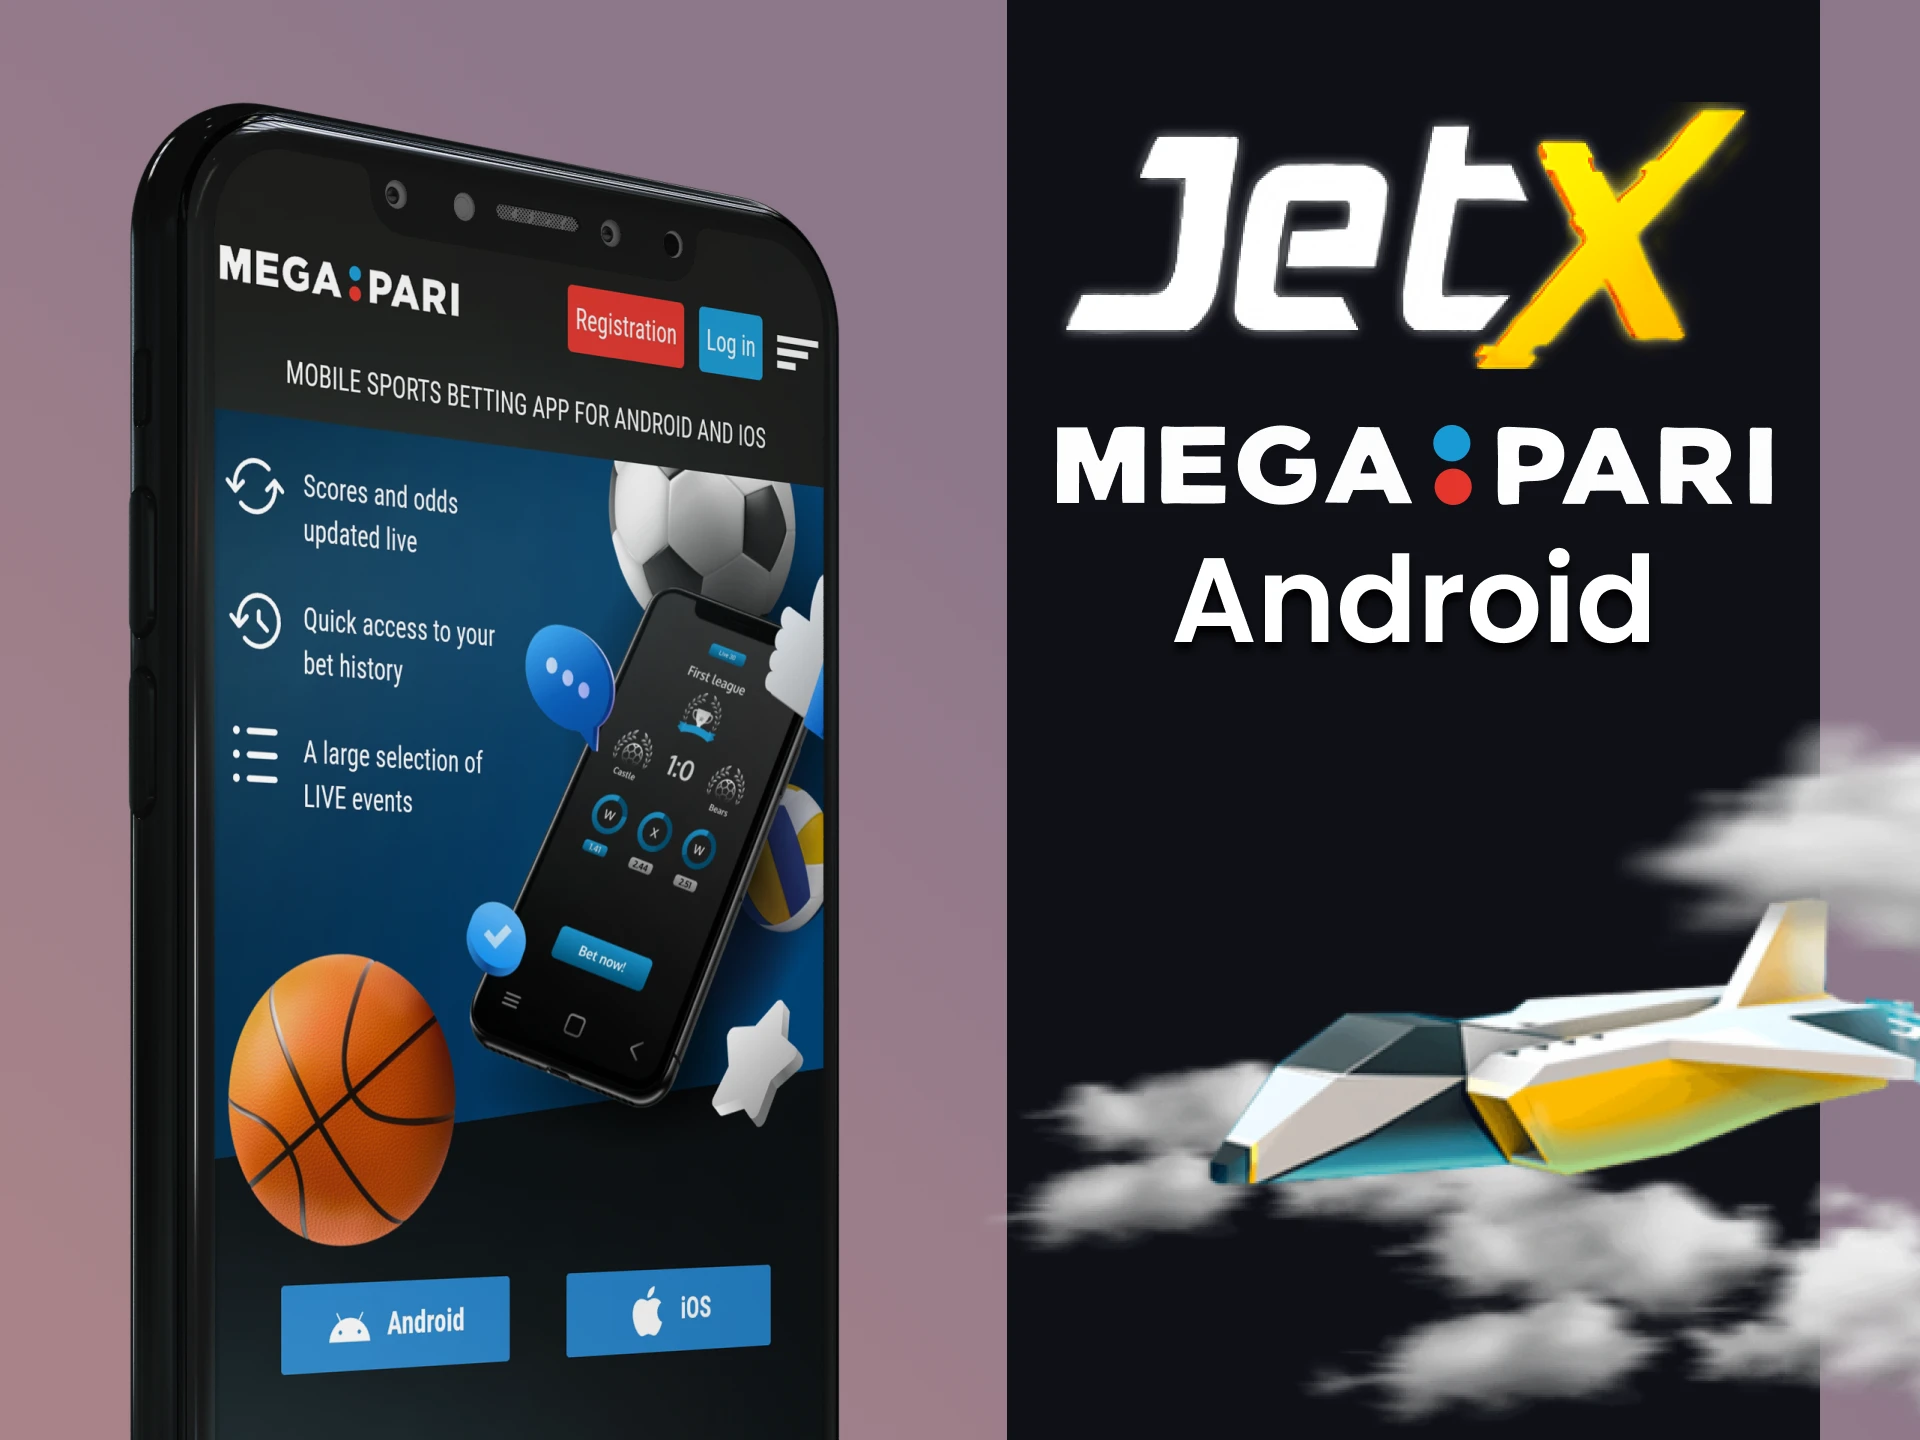 Install the MegaPari app on Android to play JetX.